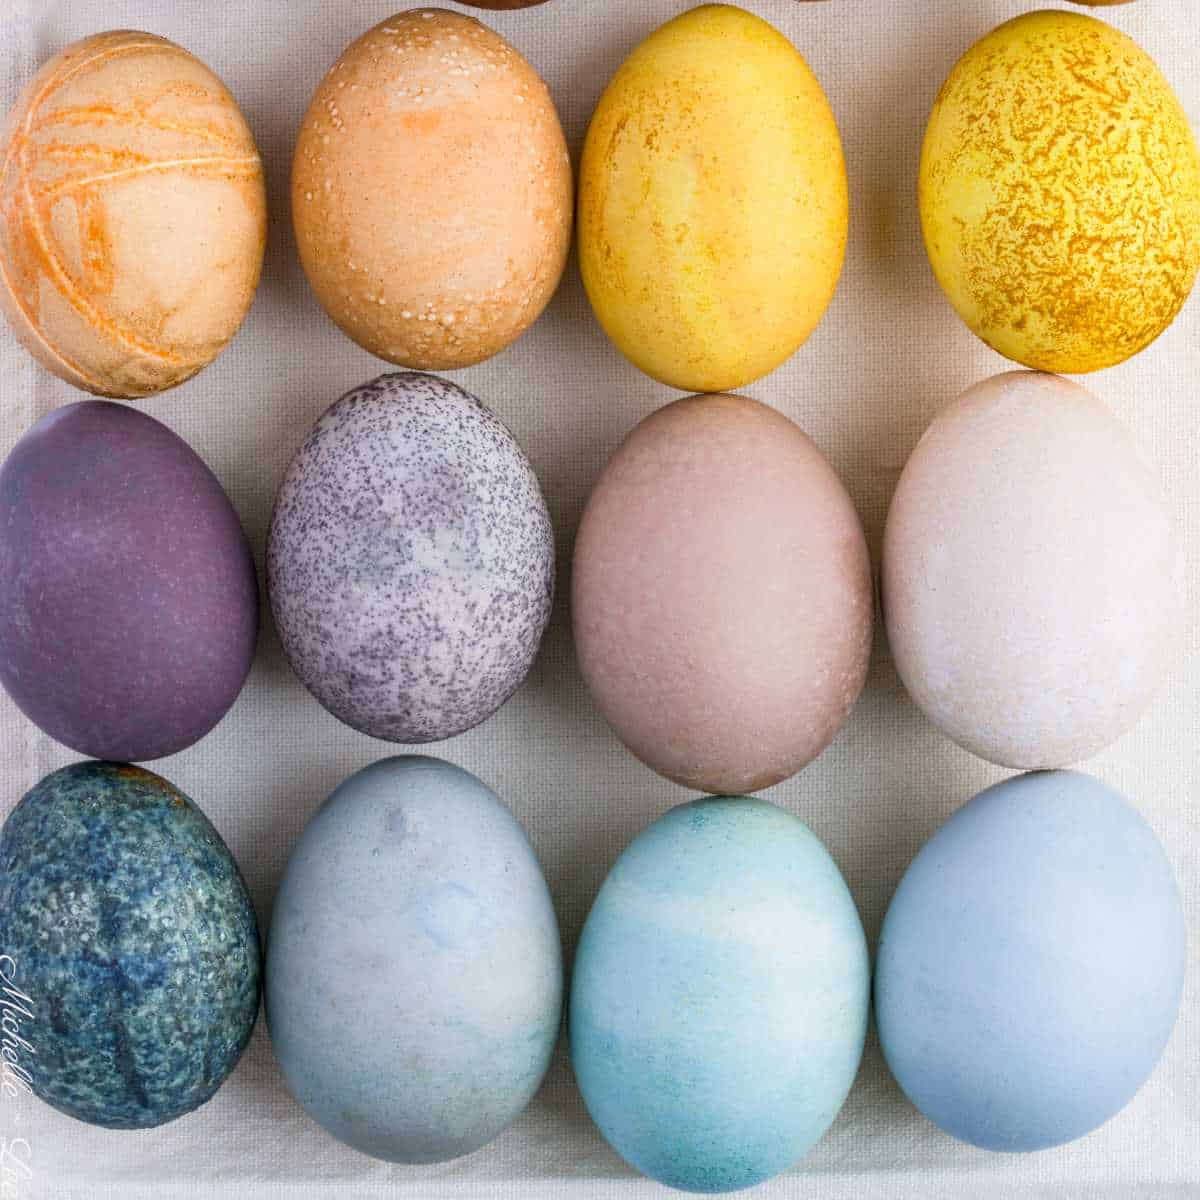 Natural egg dyes in blue, purple, yellow, and orange.